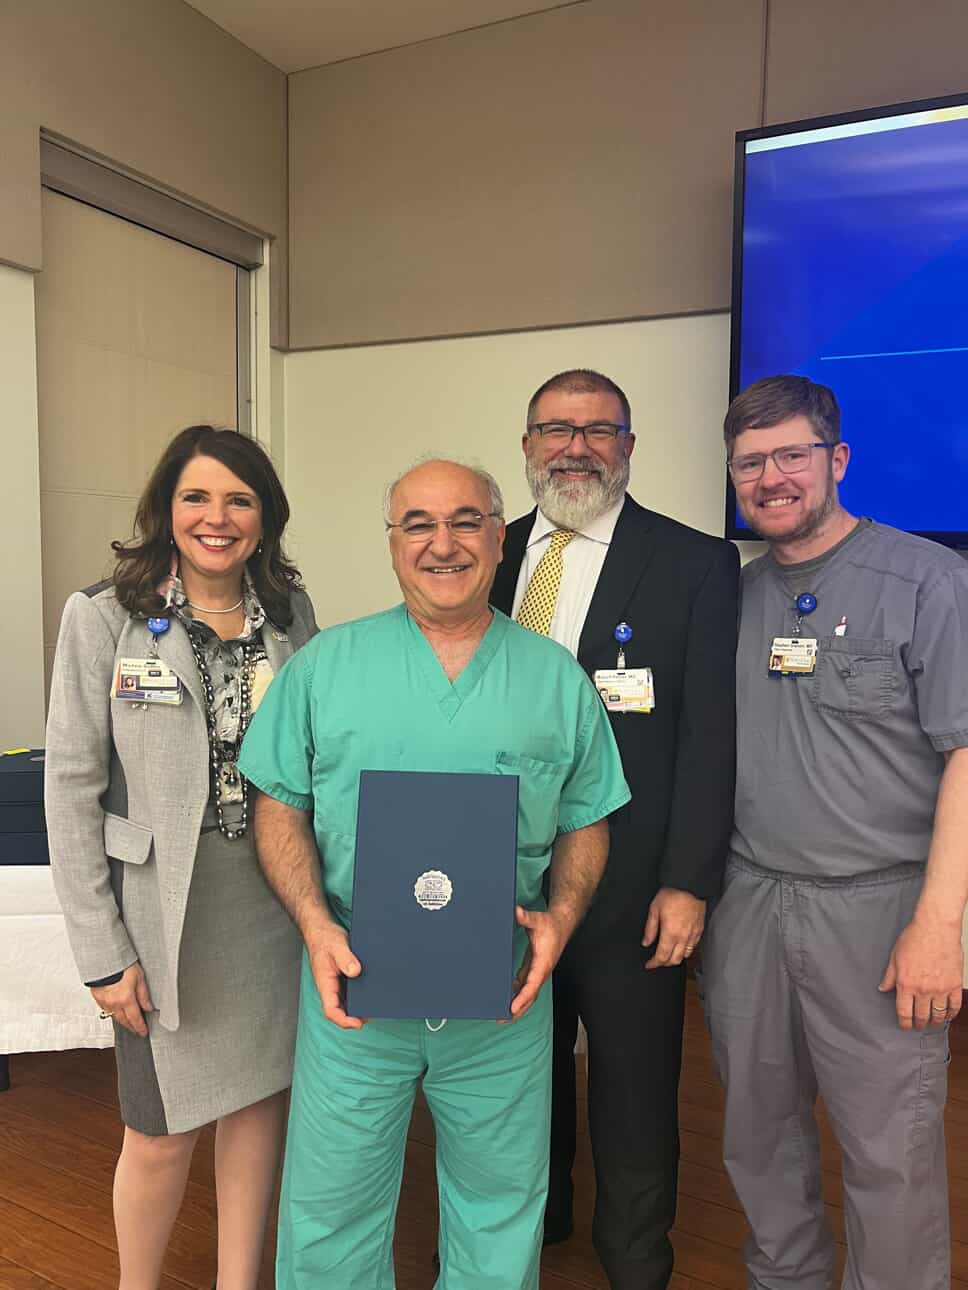 From left are President/CEO Michele Sutton, FACHE; 2023 Physician of the Year Jose Mena, MD, FACS; Chief Medical Officer Robert Peltier, MD; and Stephen Graham, MD, who was named Physician of the Year in 2022.